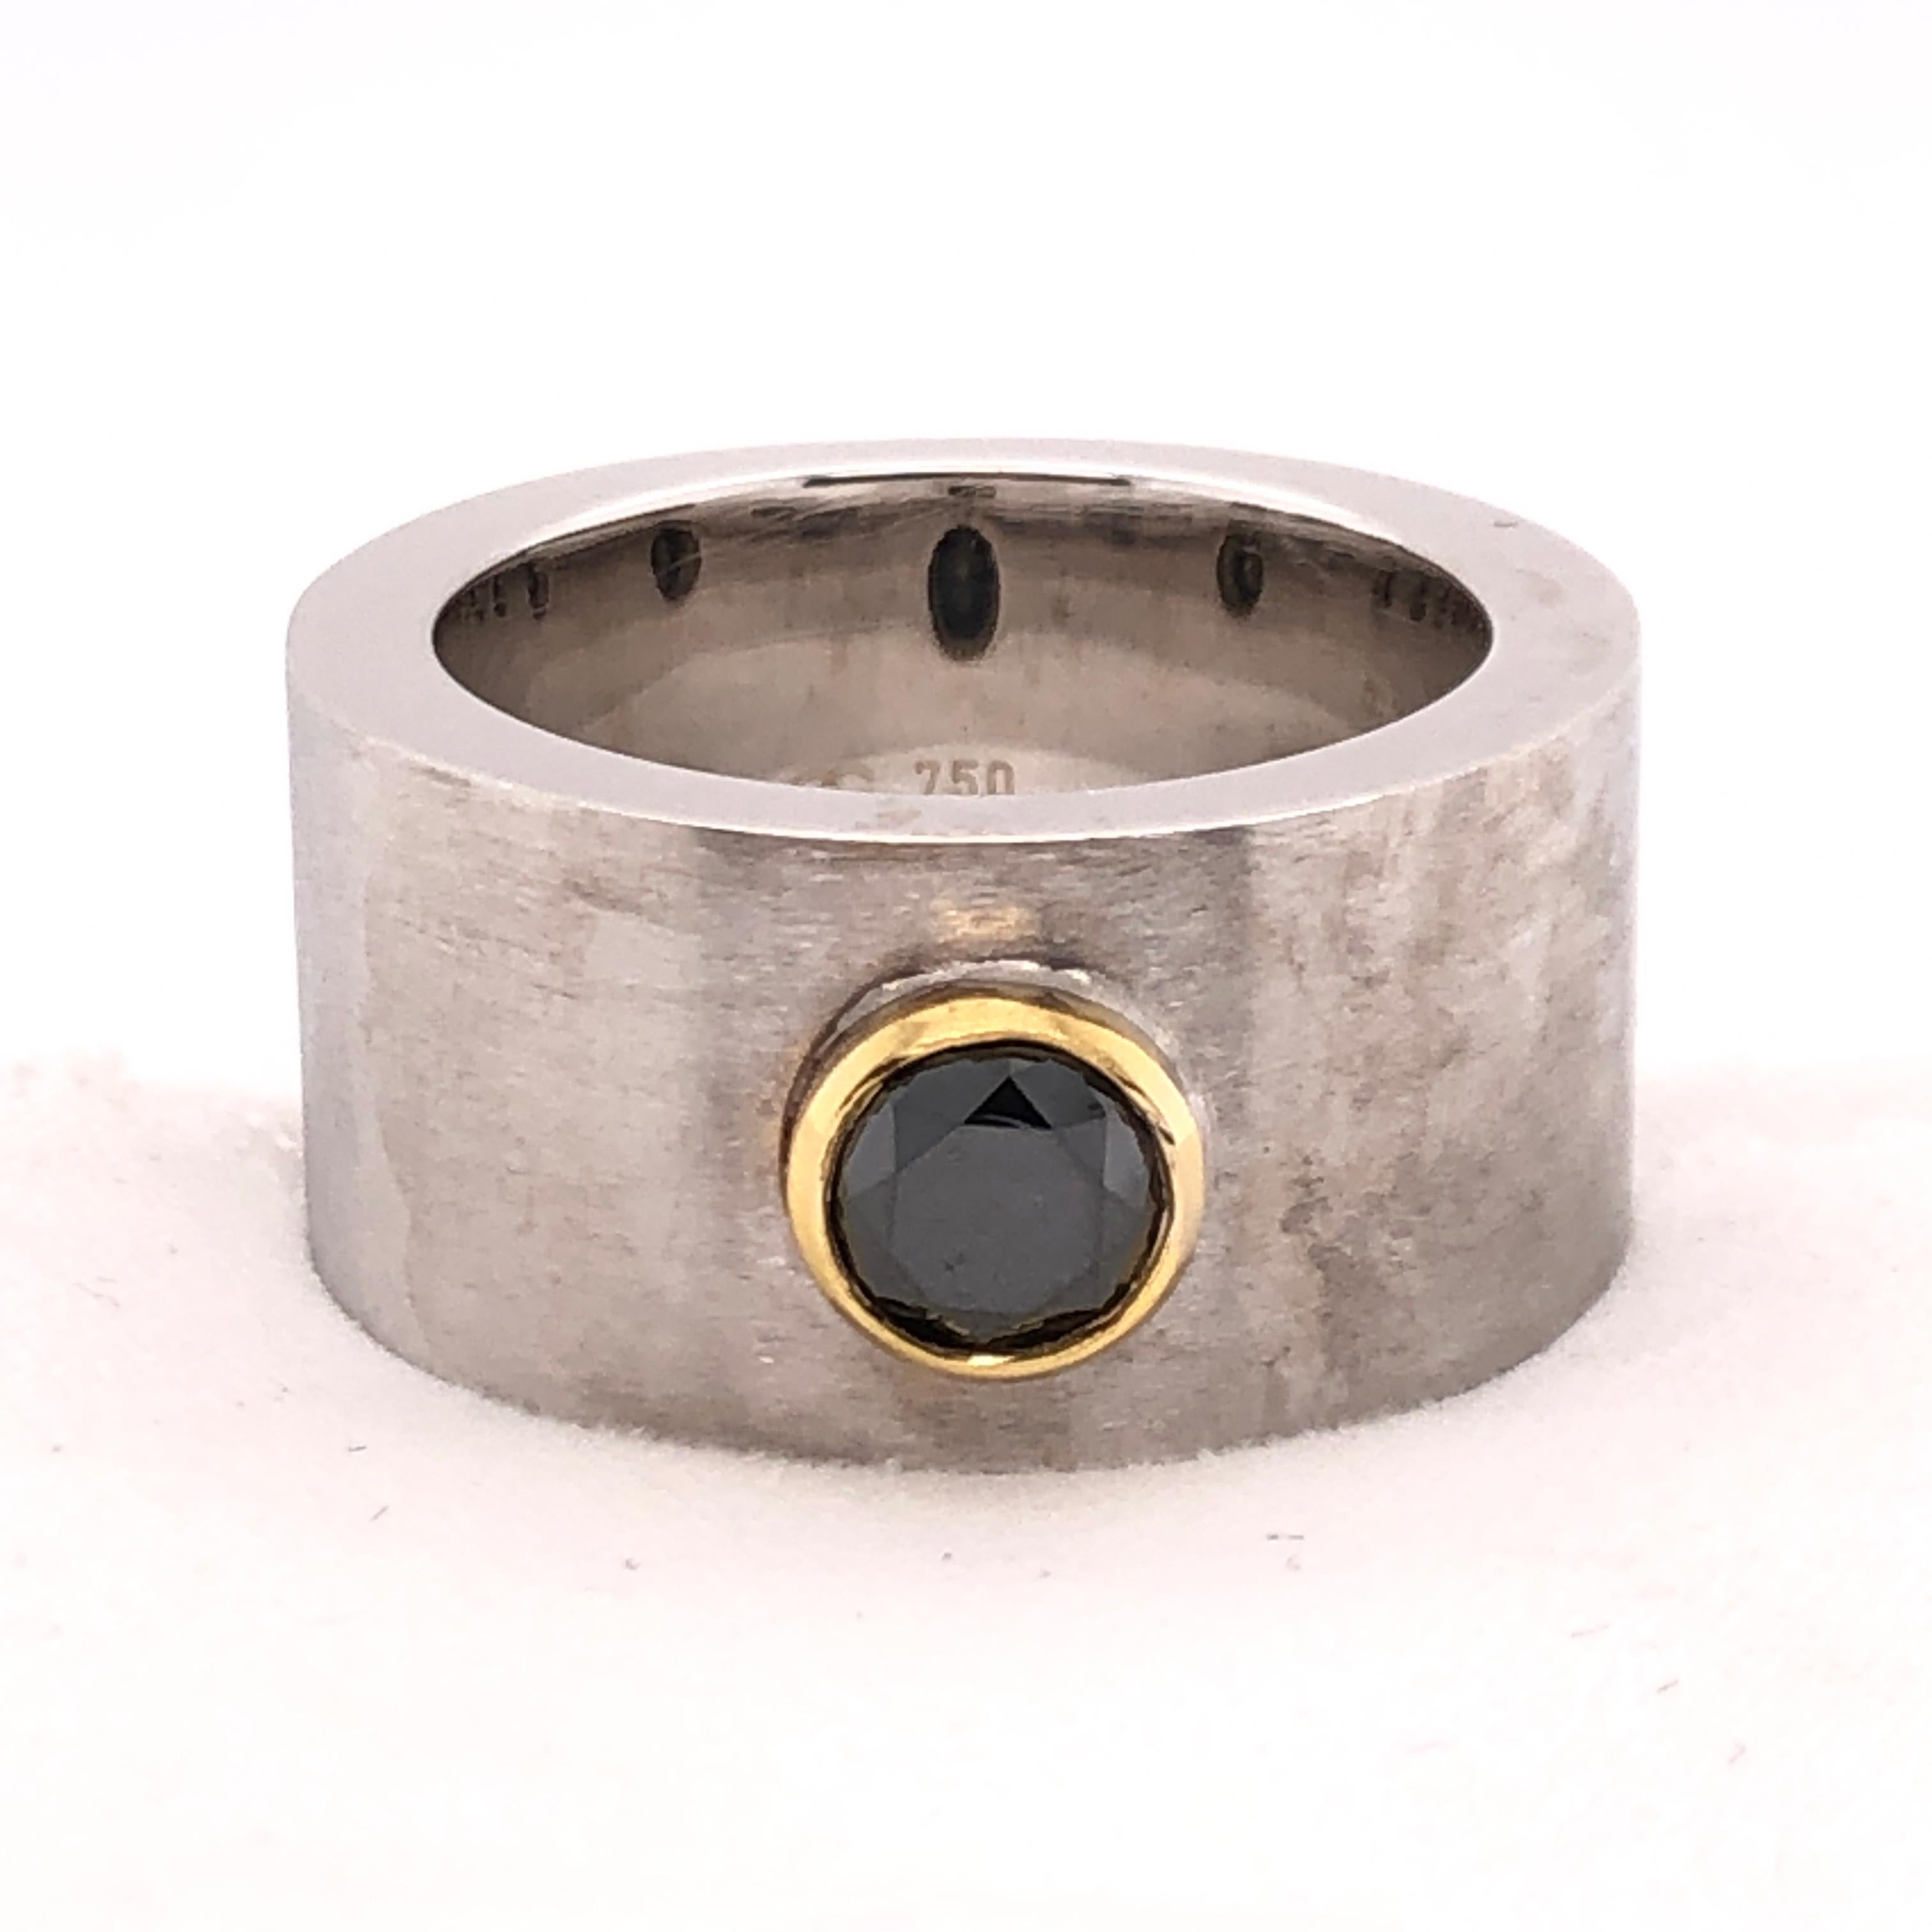 This is a substantial ring from Orianne Collins for a substantial character. A 1.02 CT round cut black diamond set into a yellow gold bezel creates the focal point against the stout brushed white gold band. 
Versatile and a conversation starter,